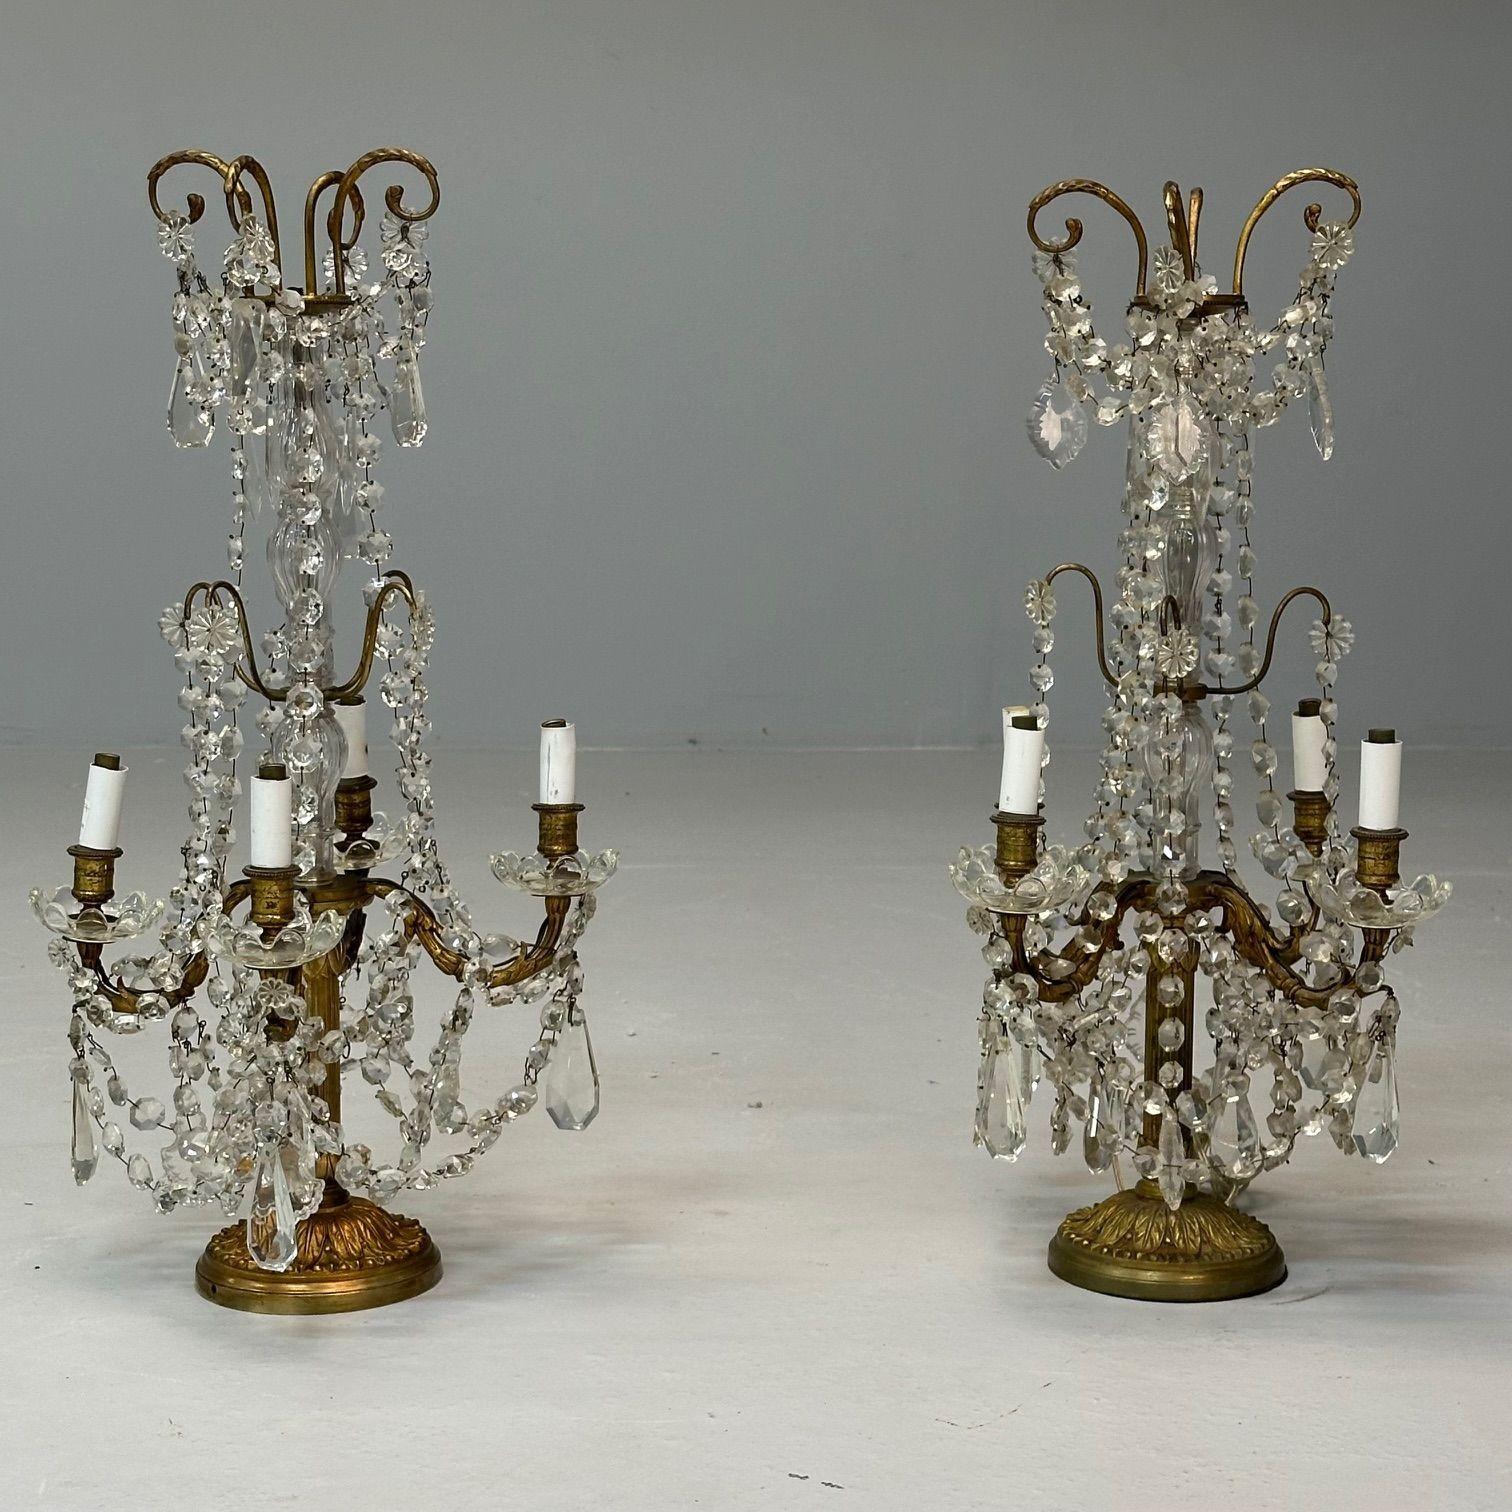 Louis XVI Style, Candelabras, Gilt Bronze, Crystal, France, 1960s

Each having four lights one wired and one not wired. The base strong and sturdy with hanging crystals. The pair in need of minor tlc. Some crystals may be missing, however, we can